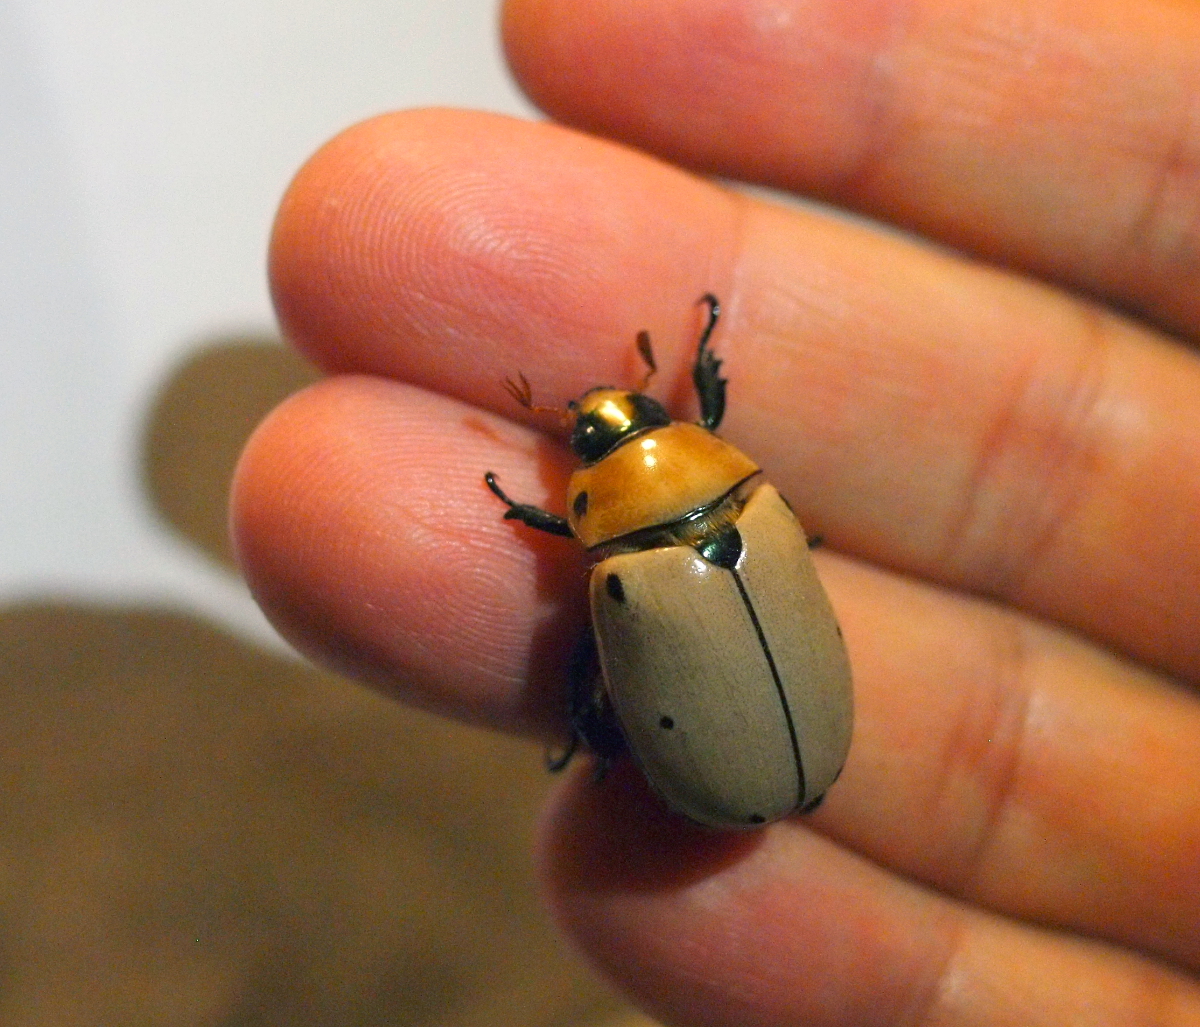 Grapevine beetle, on Monty's hand